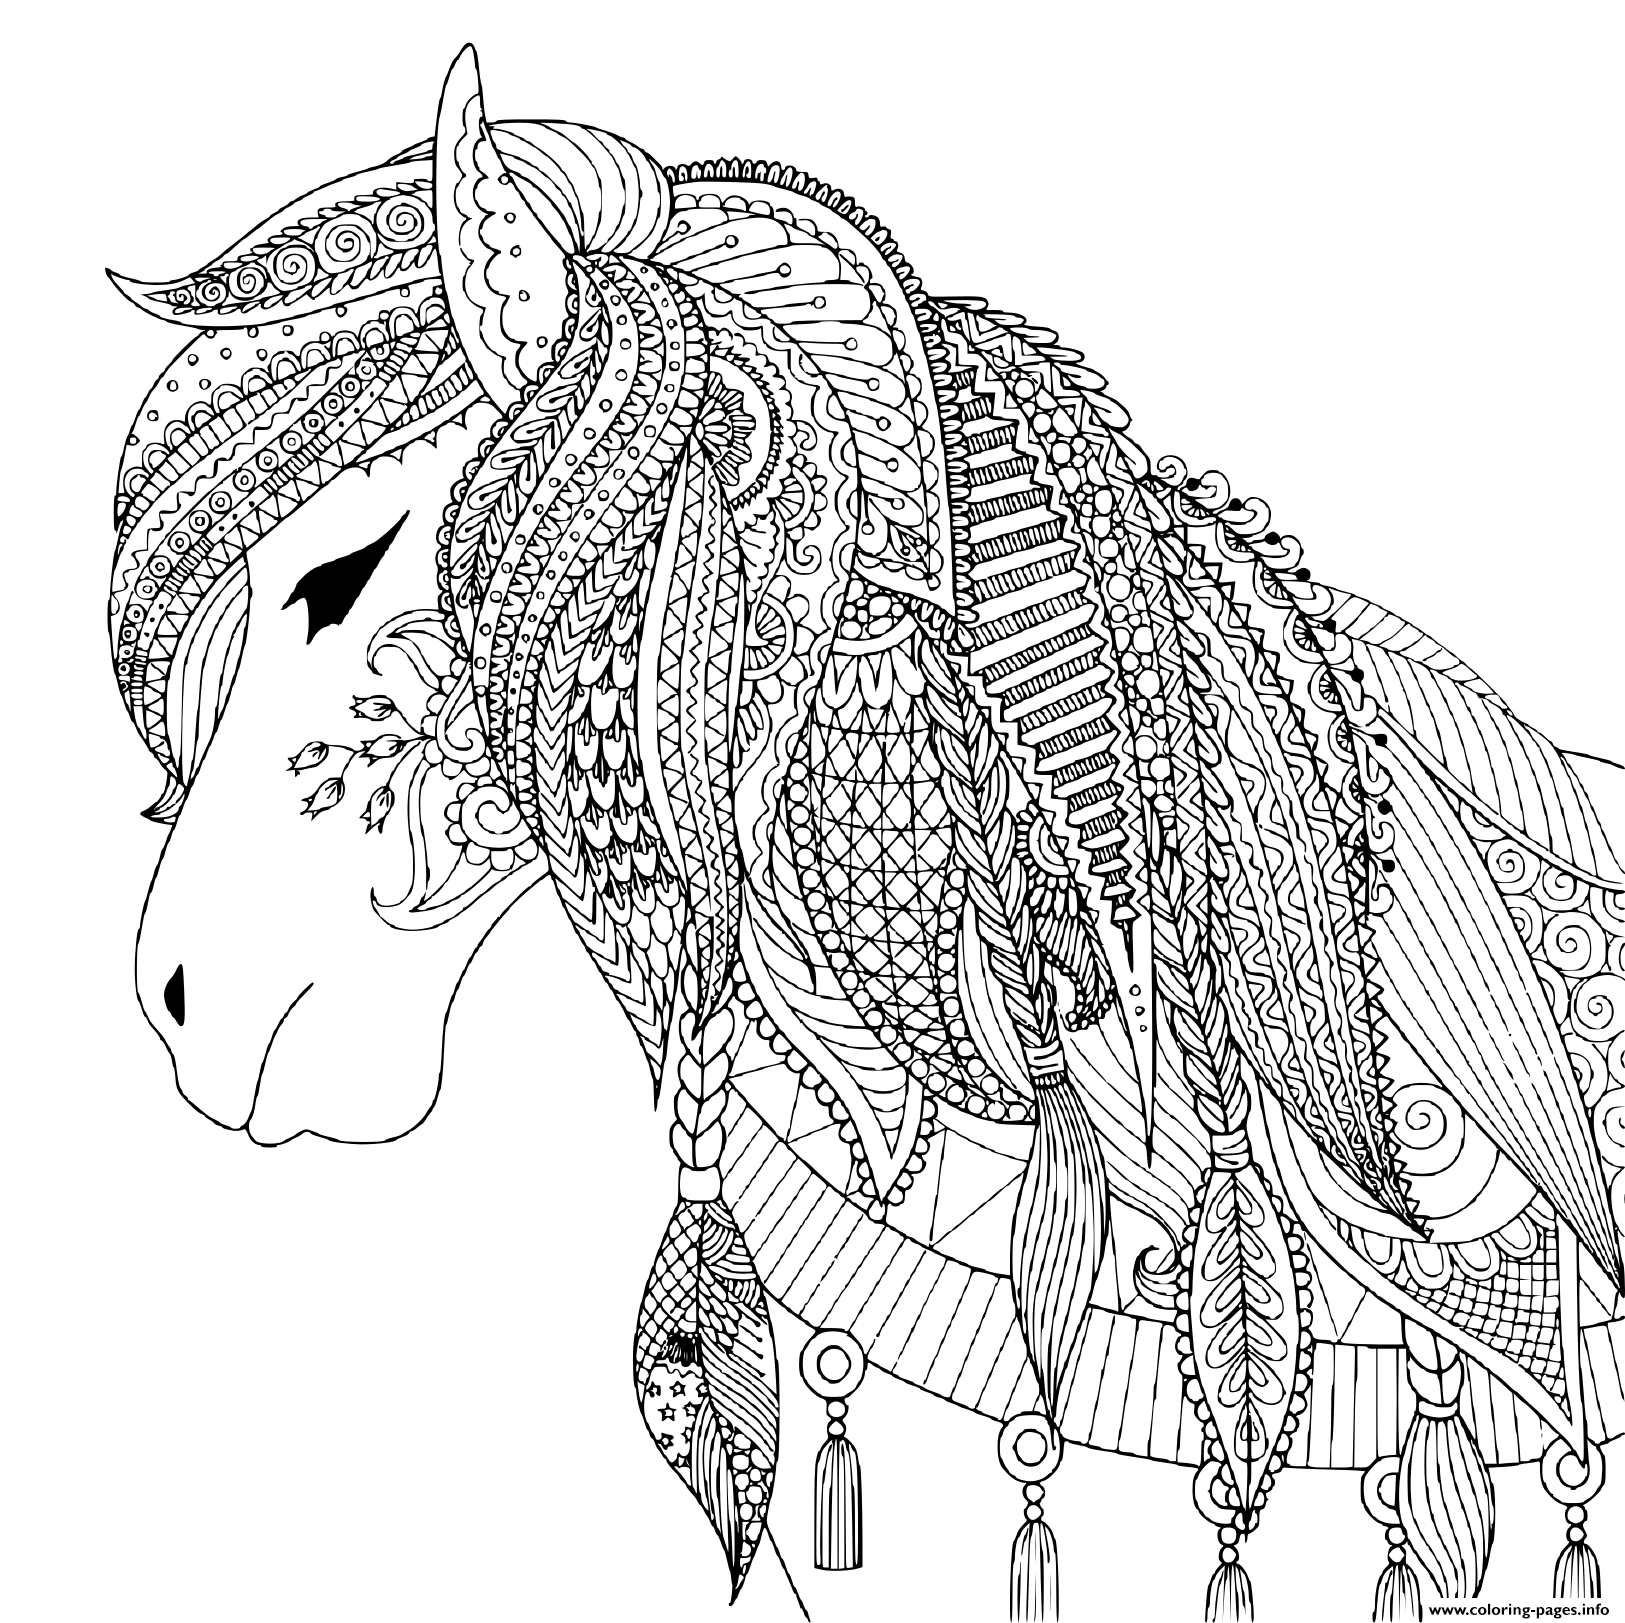 Zendoodle Design Of Horse For Adult coloring